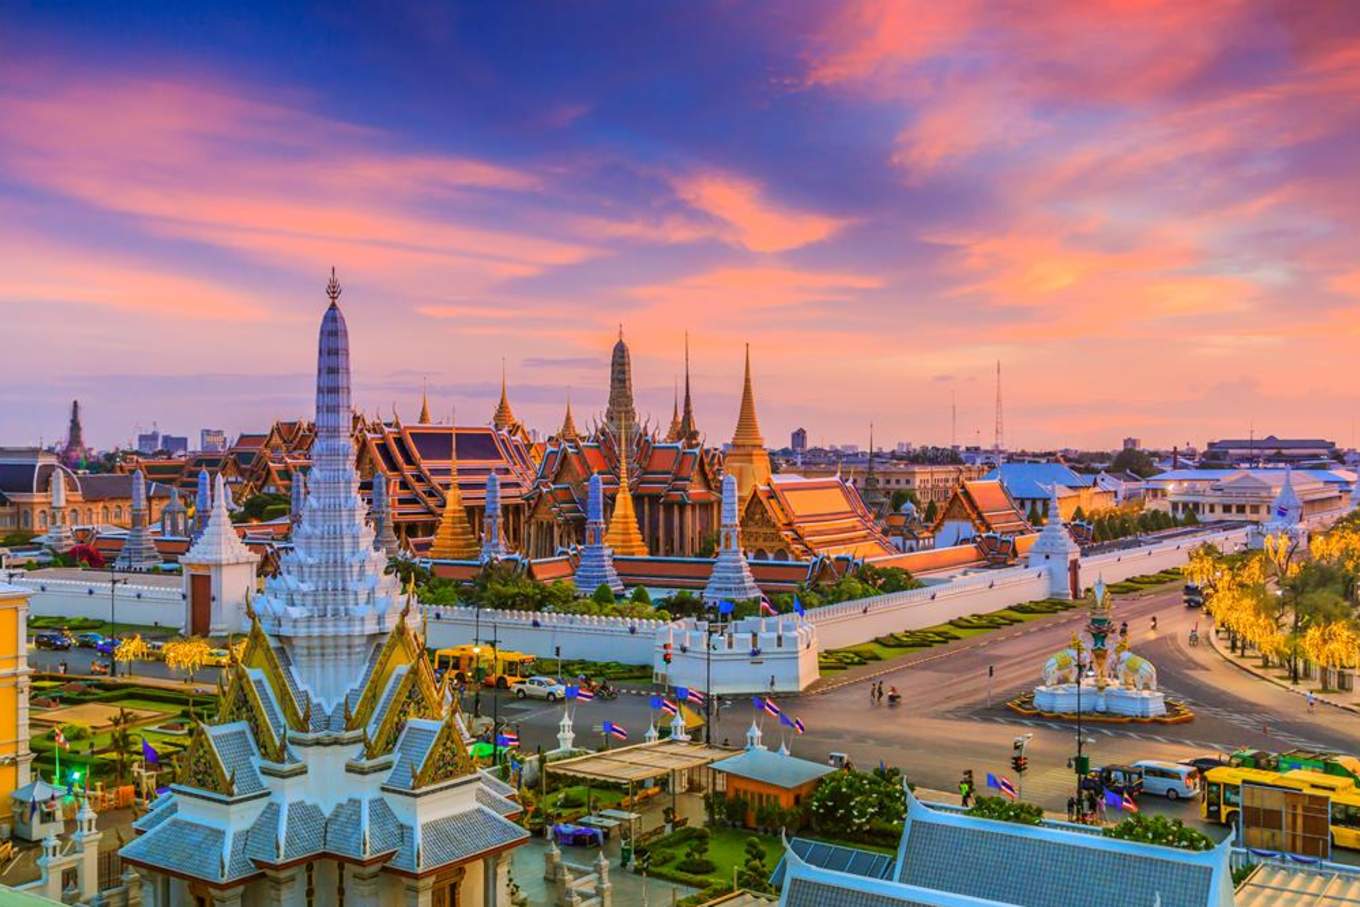 However, the name of Bangkok can still be used. (Photo / Retrieved from Pixabay)